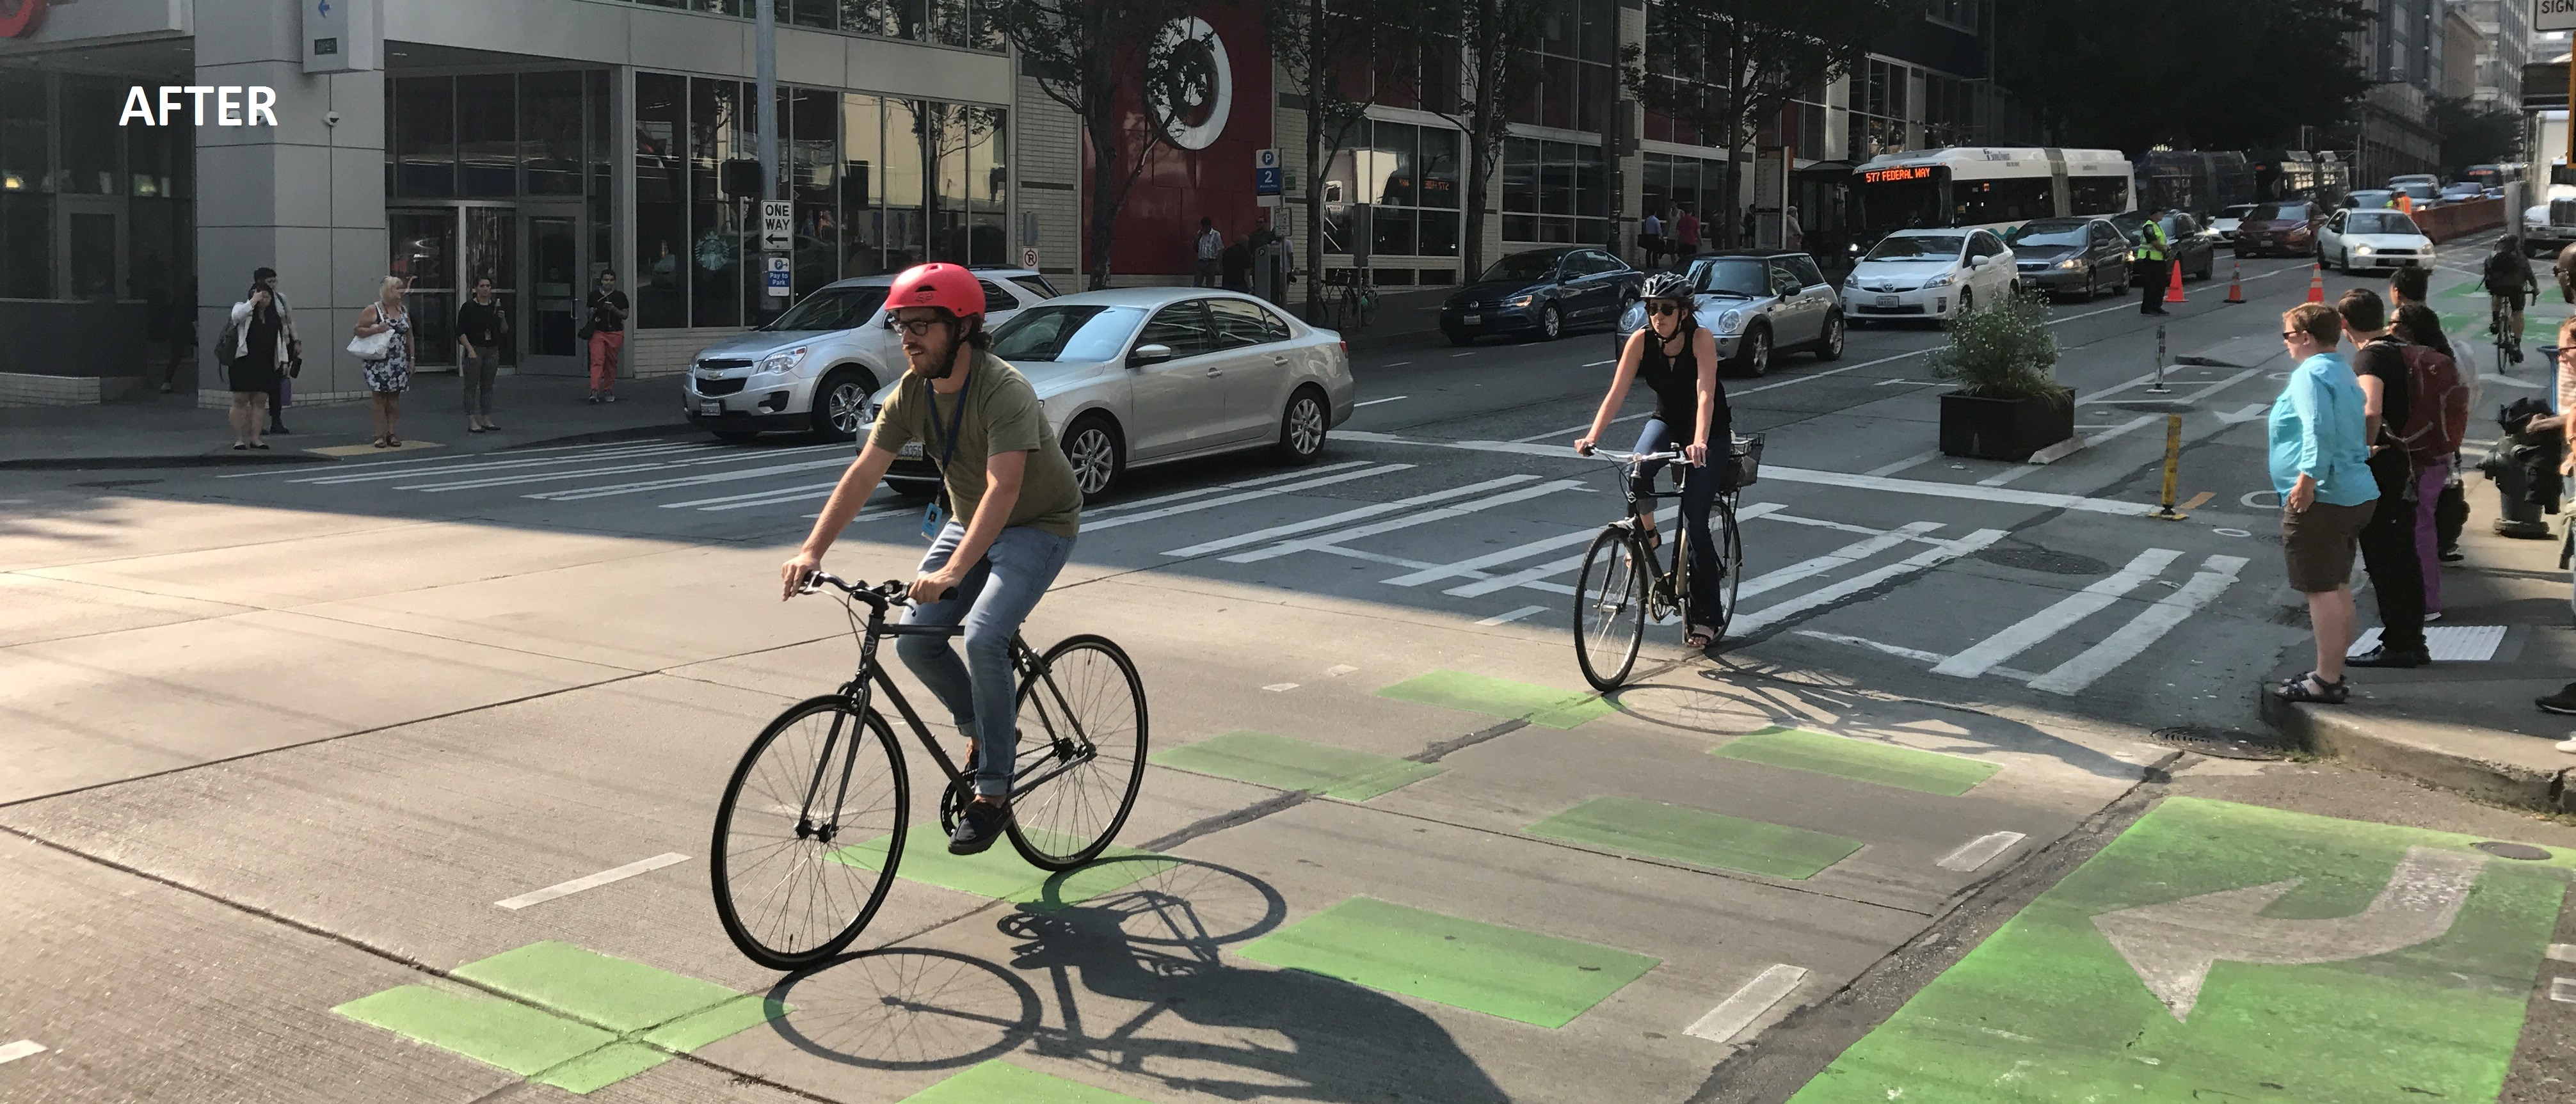 After protected bike lane is installed on Pike St, showing more bikers biking safely